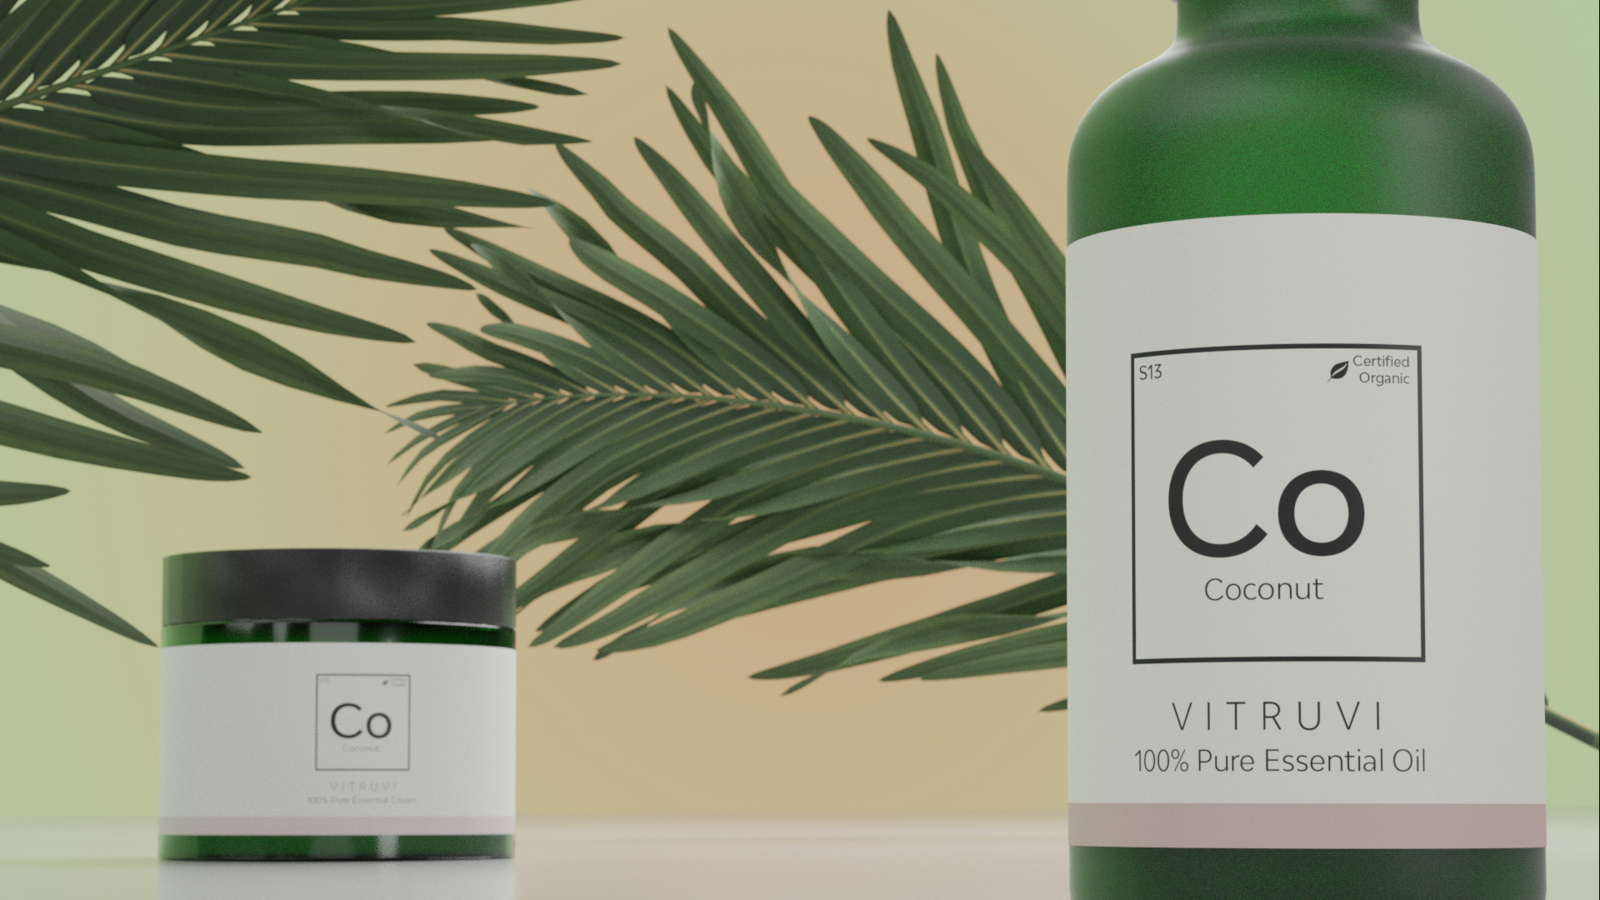 Container of Vitruvi 100% Pure Essential Oil in the forefront as well as a container in the background on display